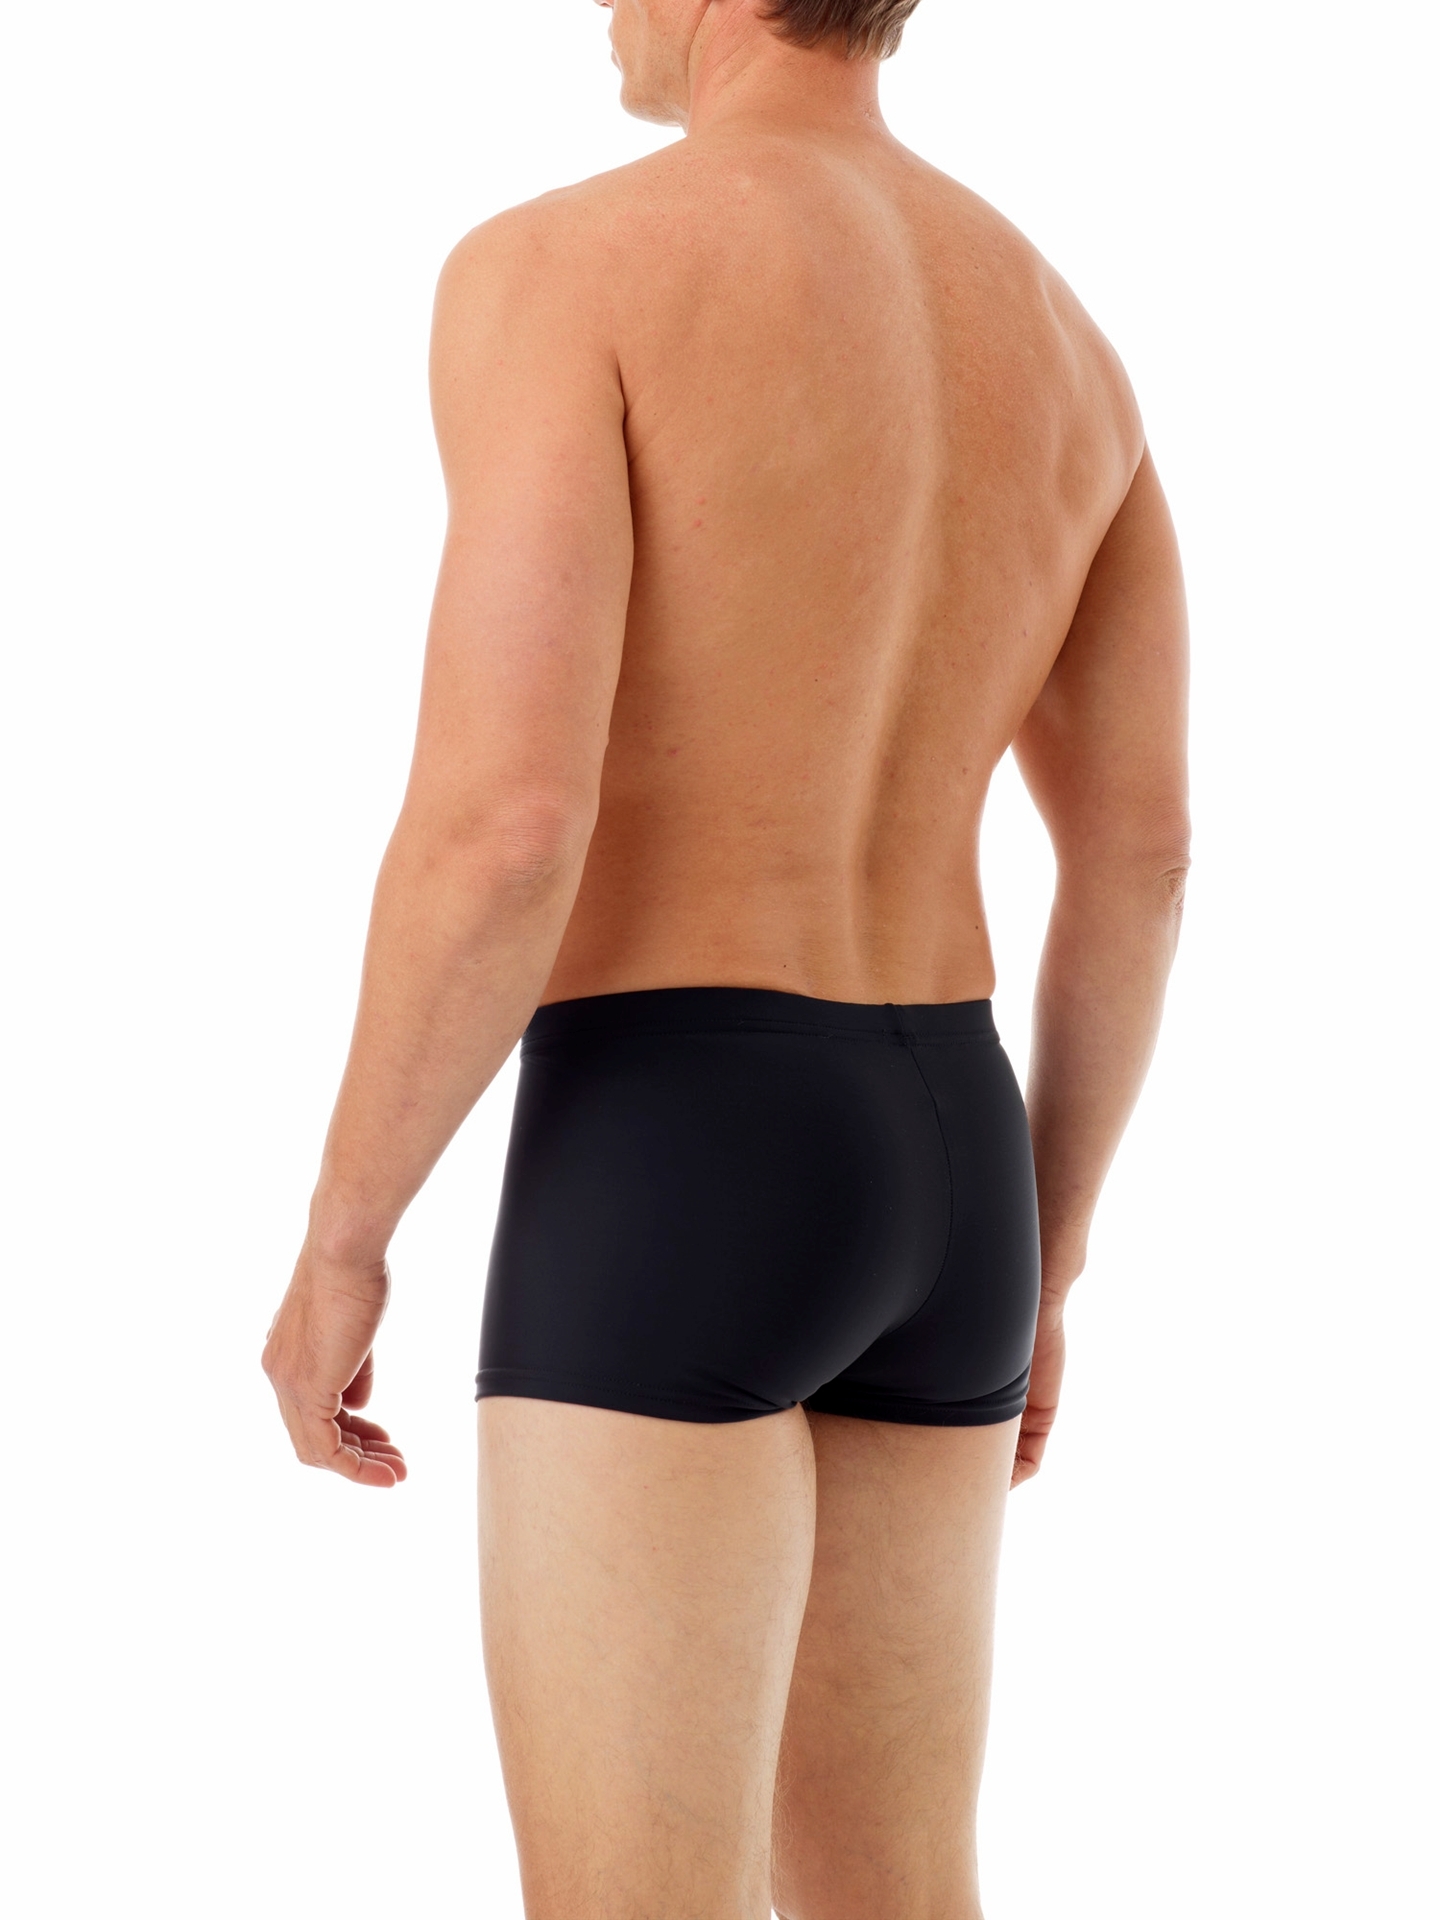 Men's Compression Bodysuit with Rear Zipper, Discover at Underworks